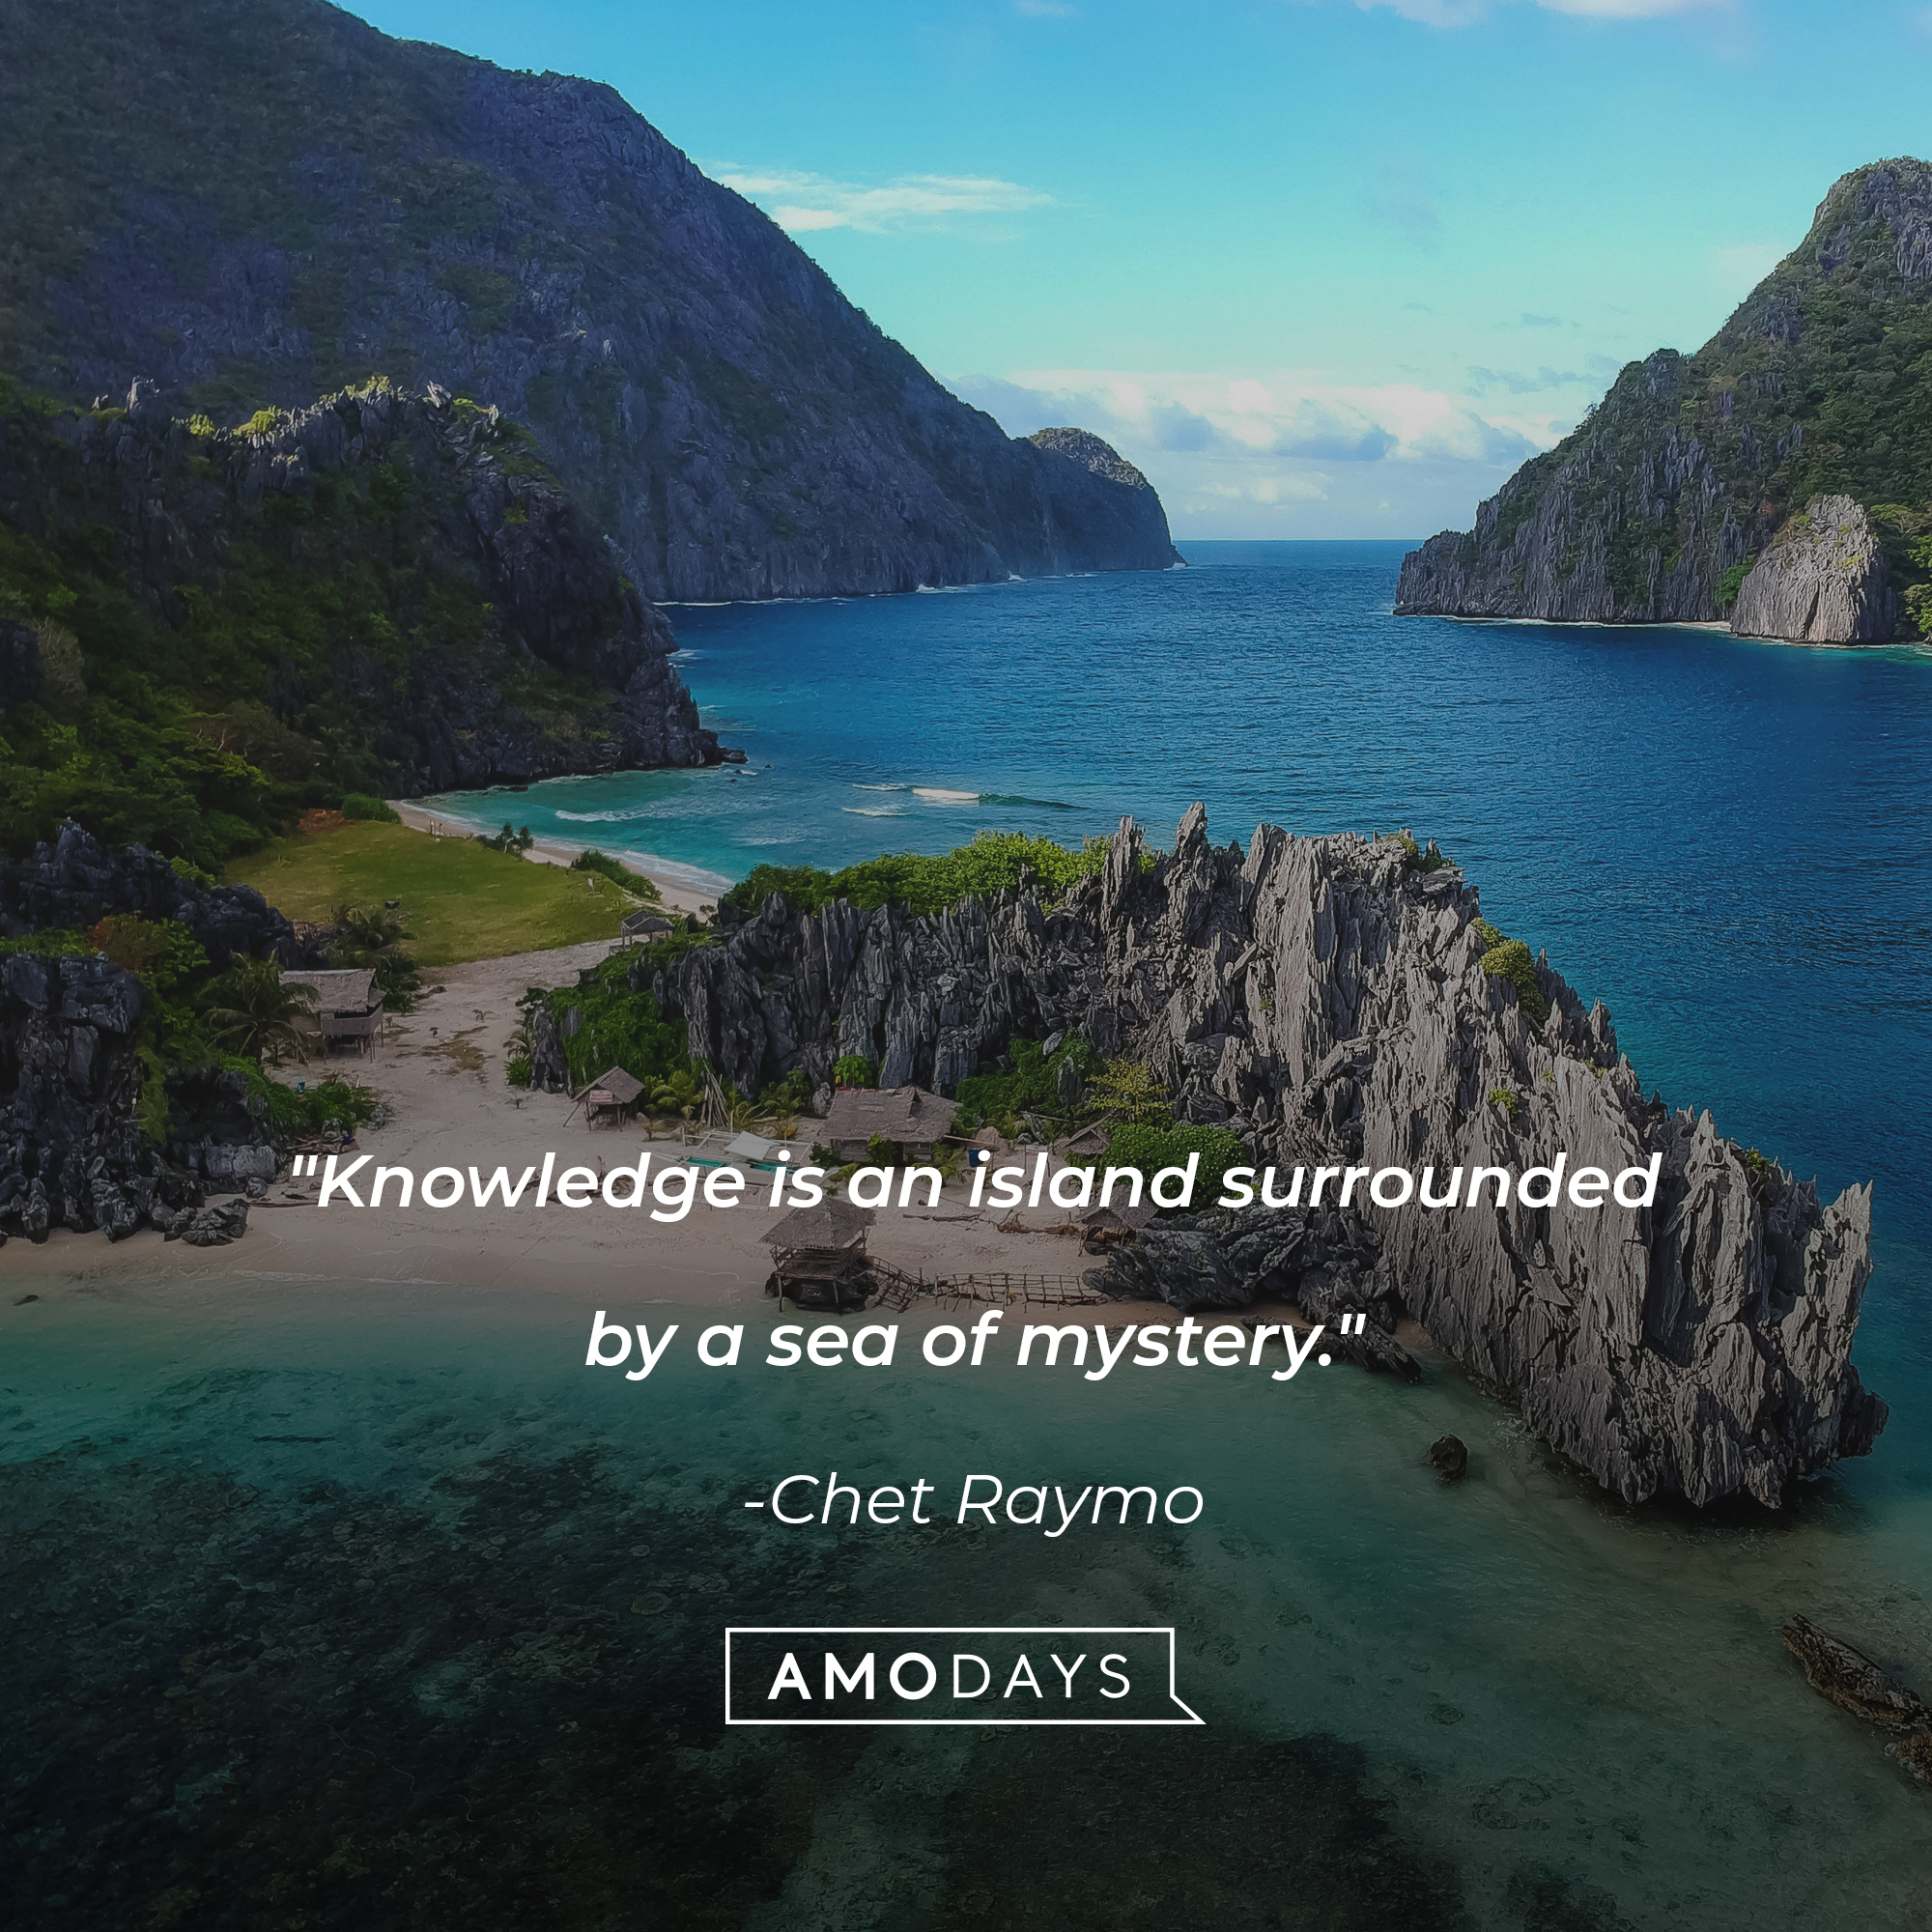 Chet Raymo's quote: "Knowledge is an island surrounded by a sea of mystery." | Image: AmoDays